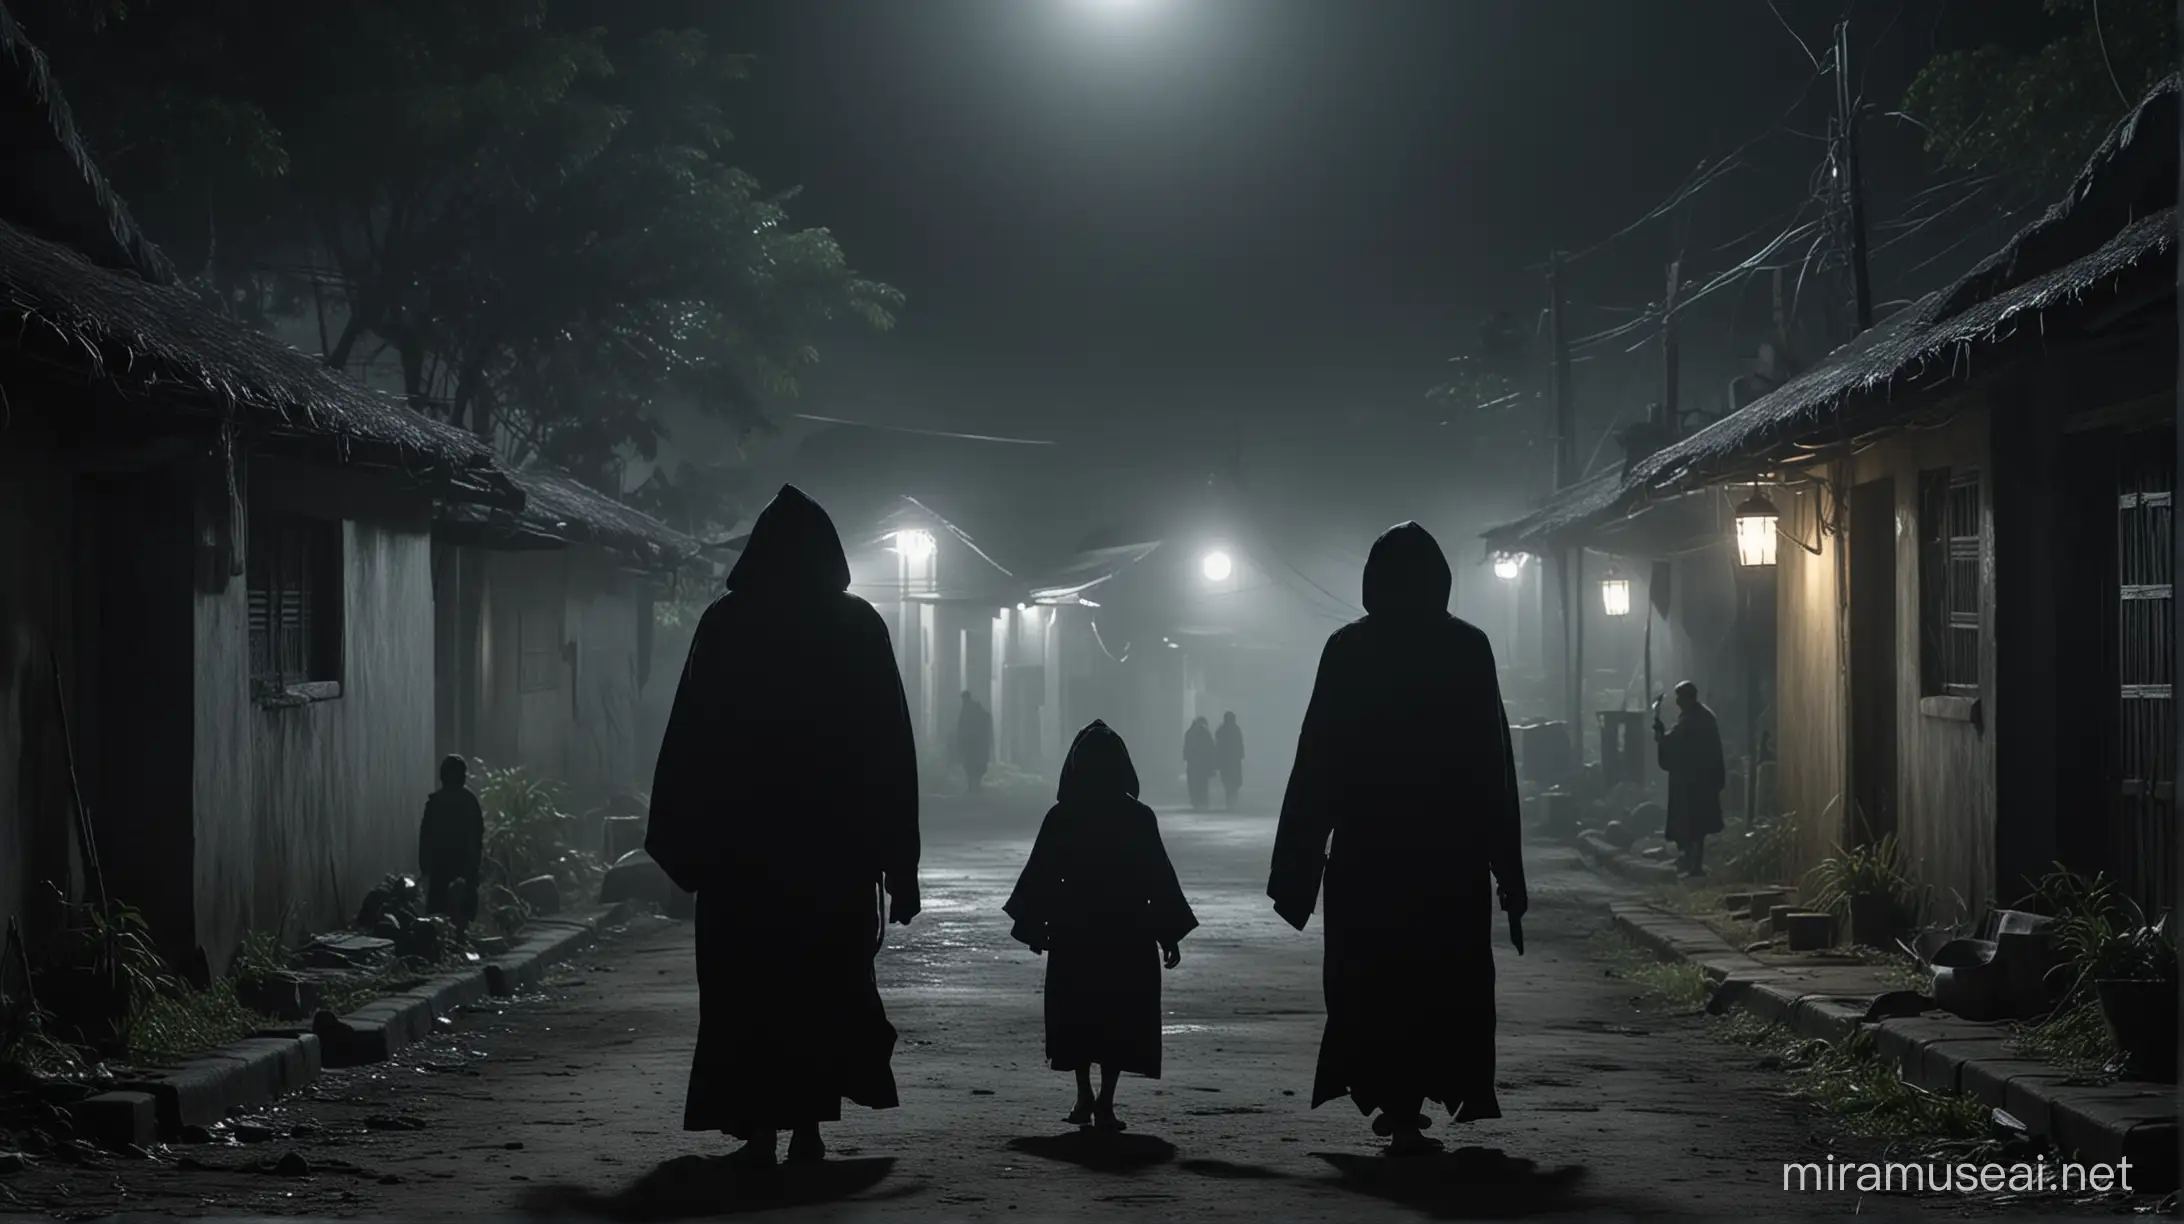 Three hooded figures—two old Filipino men and one young girl, wearing black robes, they knock on Philippine houses in the middle of the night, mysterious atmosphere, creepy, dark, cinematic